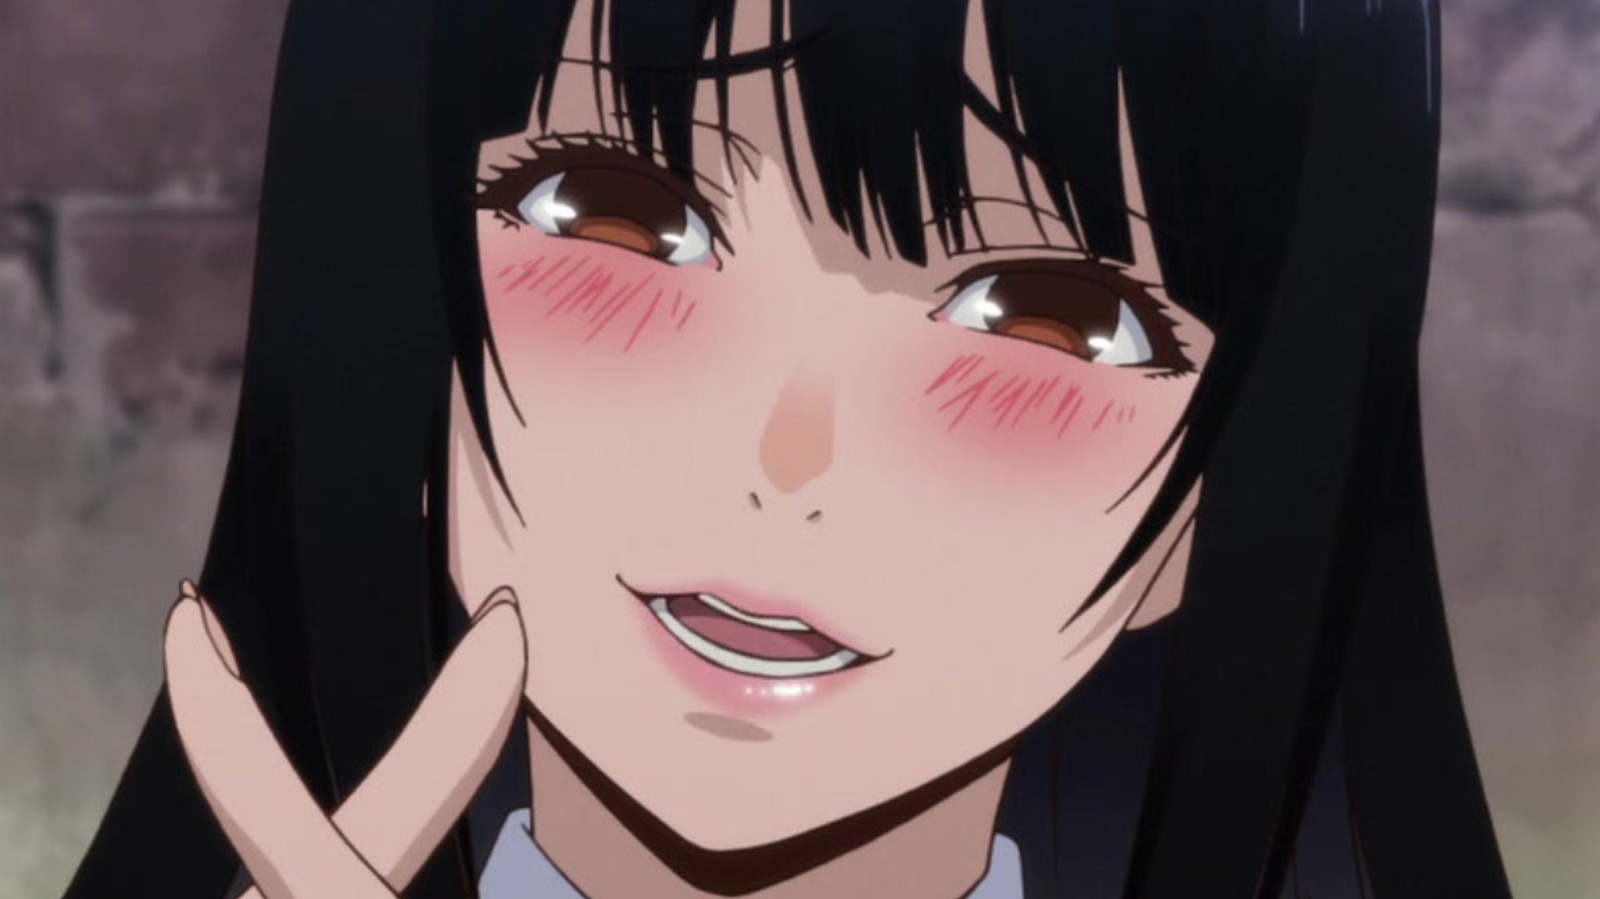 Any anime similar to Kakegurui? If not, is there any with powerful